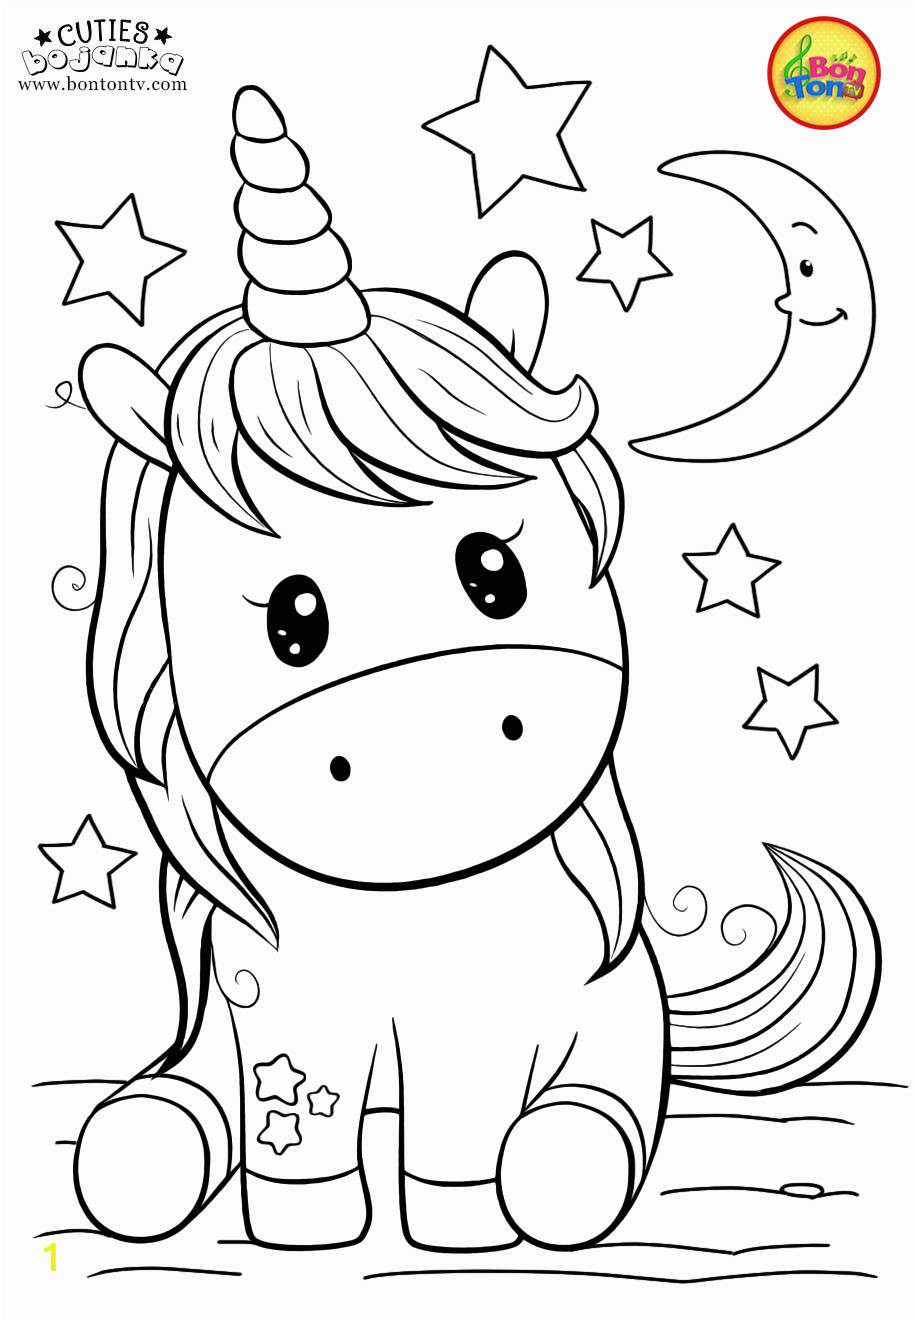 Coloring Pages for Kids Unicorn Cuties Coloring Pages for Kids Free Preschool Printables